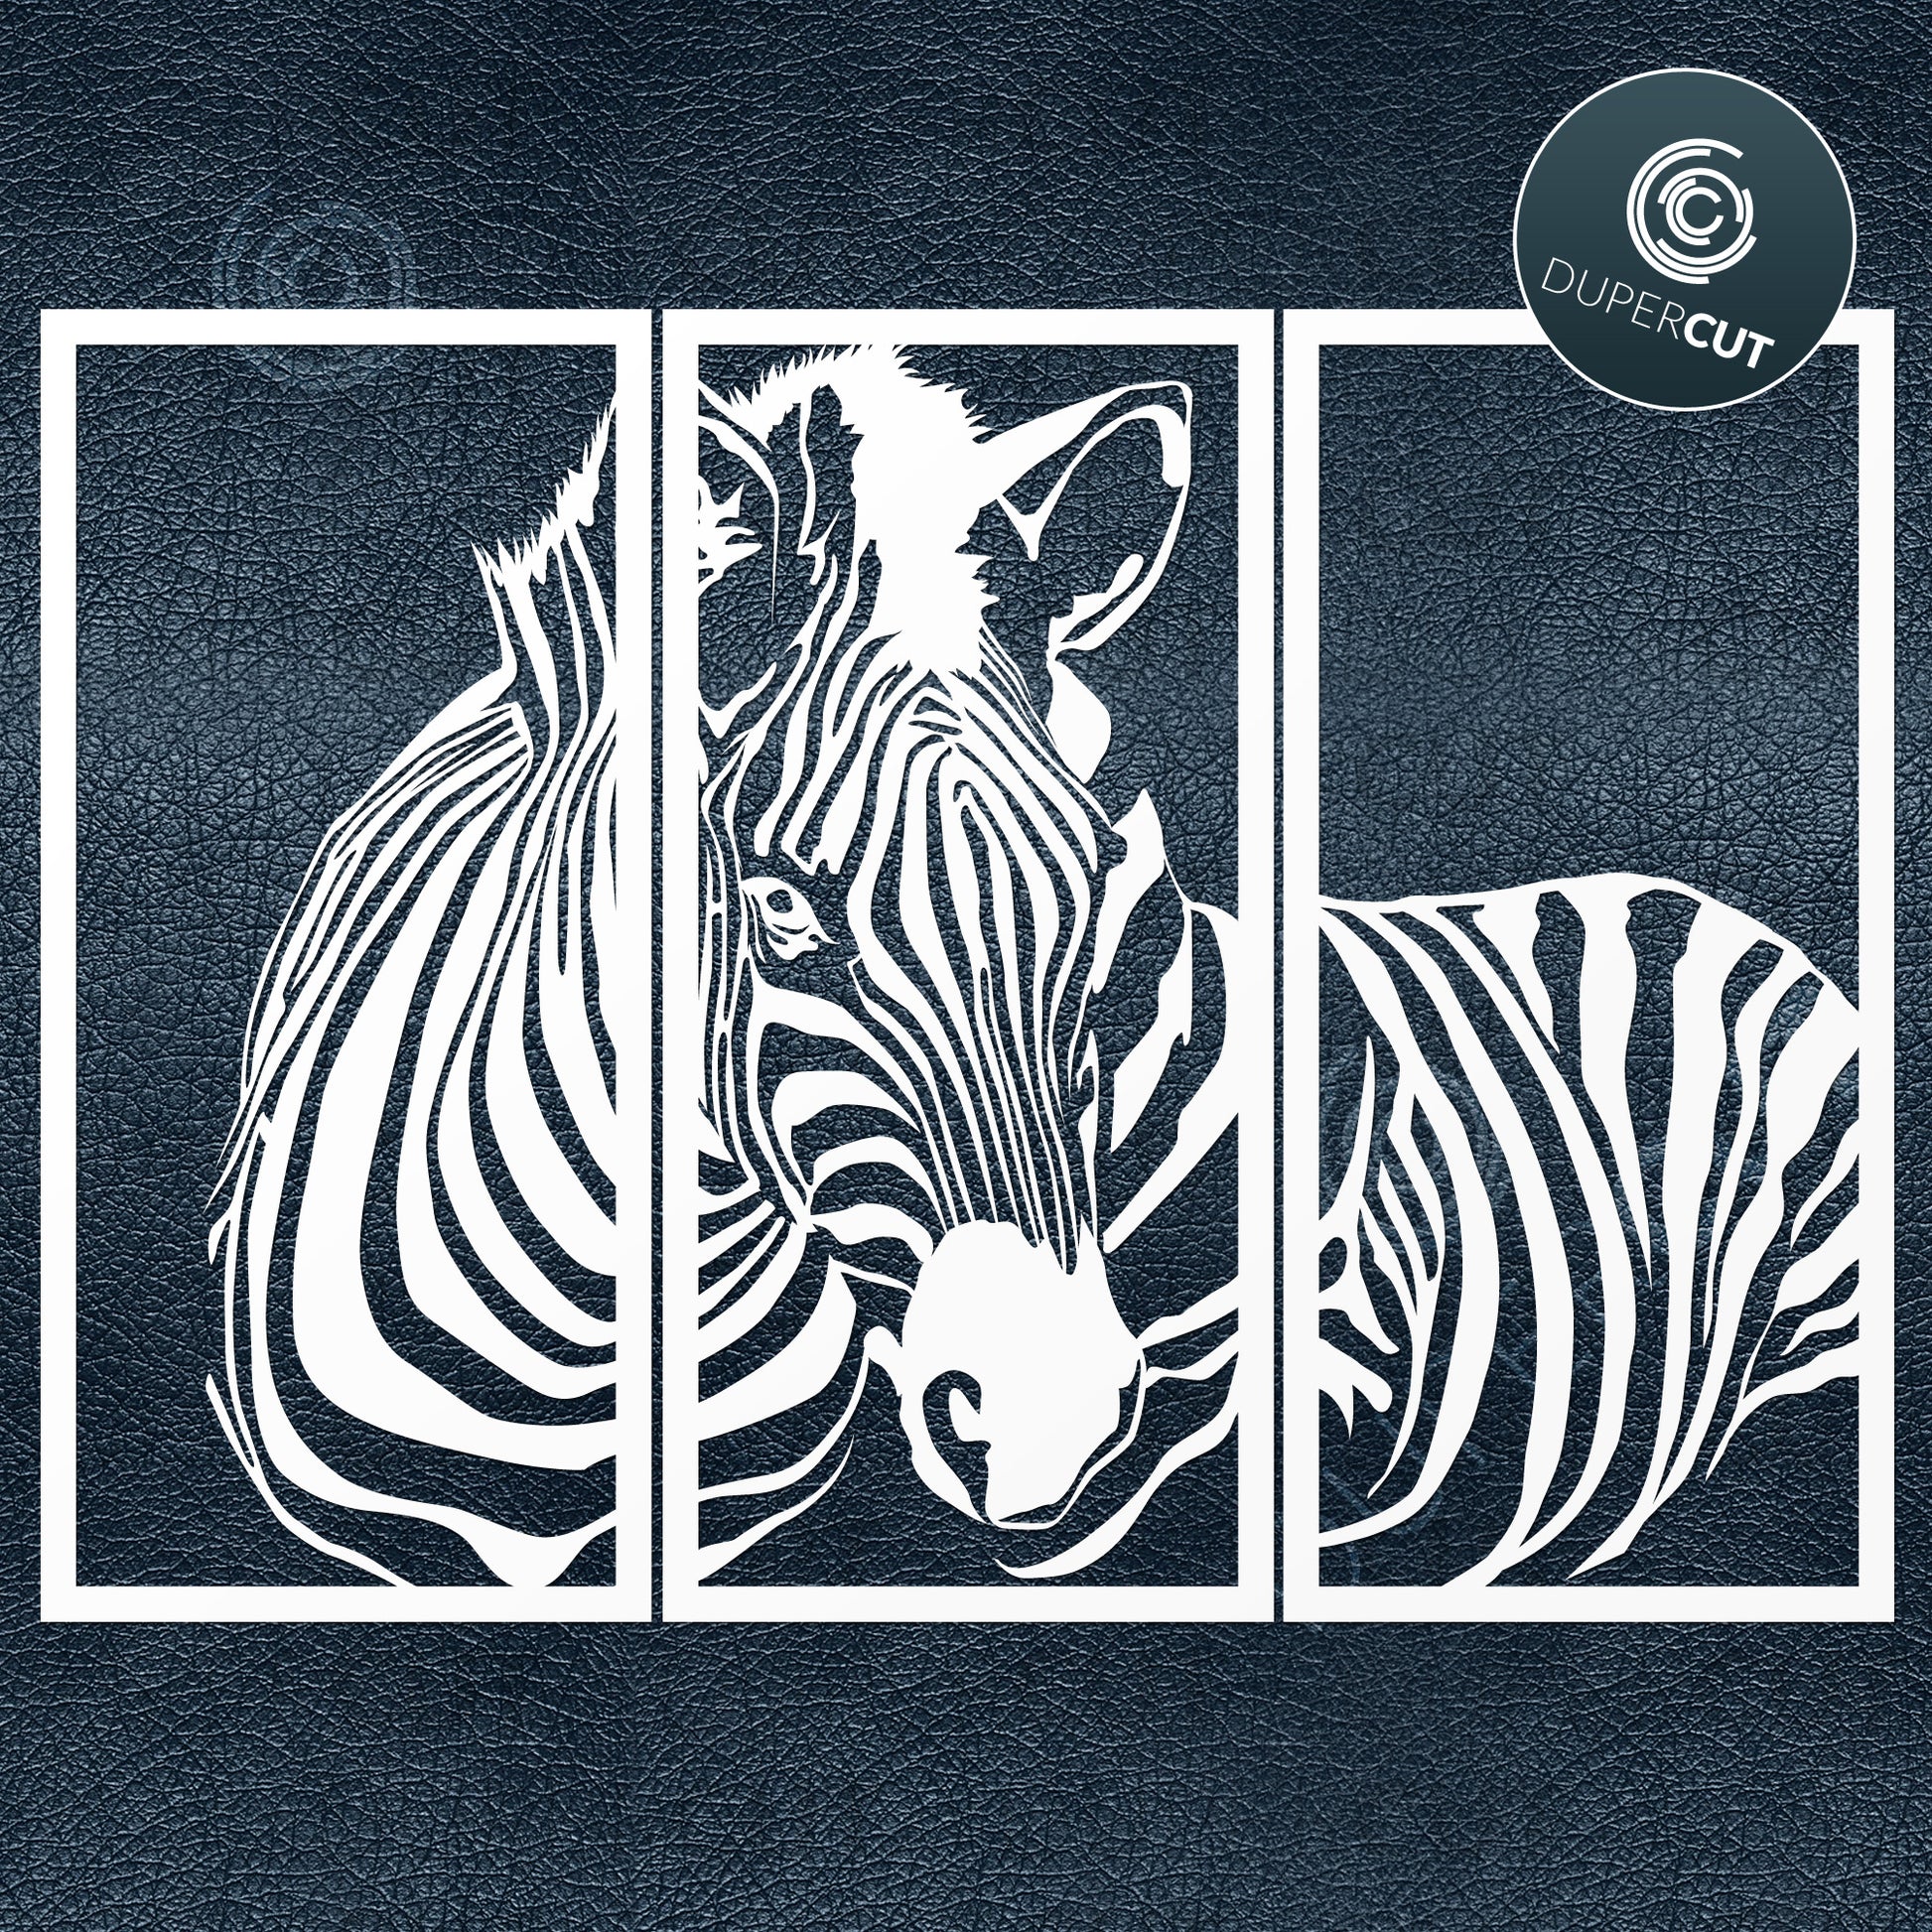 Zebra, DIY wall decoration cutting  template - SVG DXF PNG files for Cricut, Glowforge, Silhouette Cameo, CNC Machines